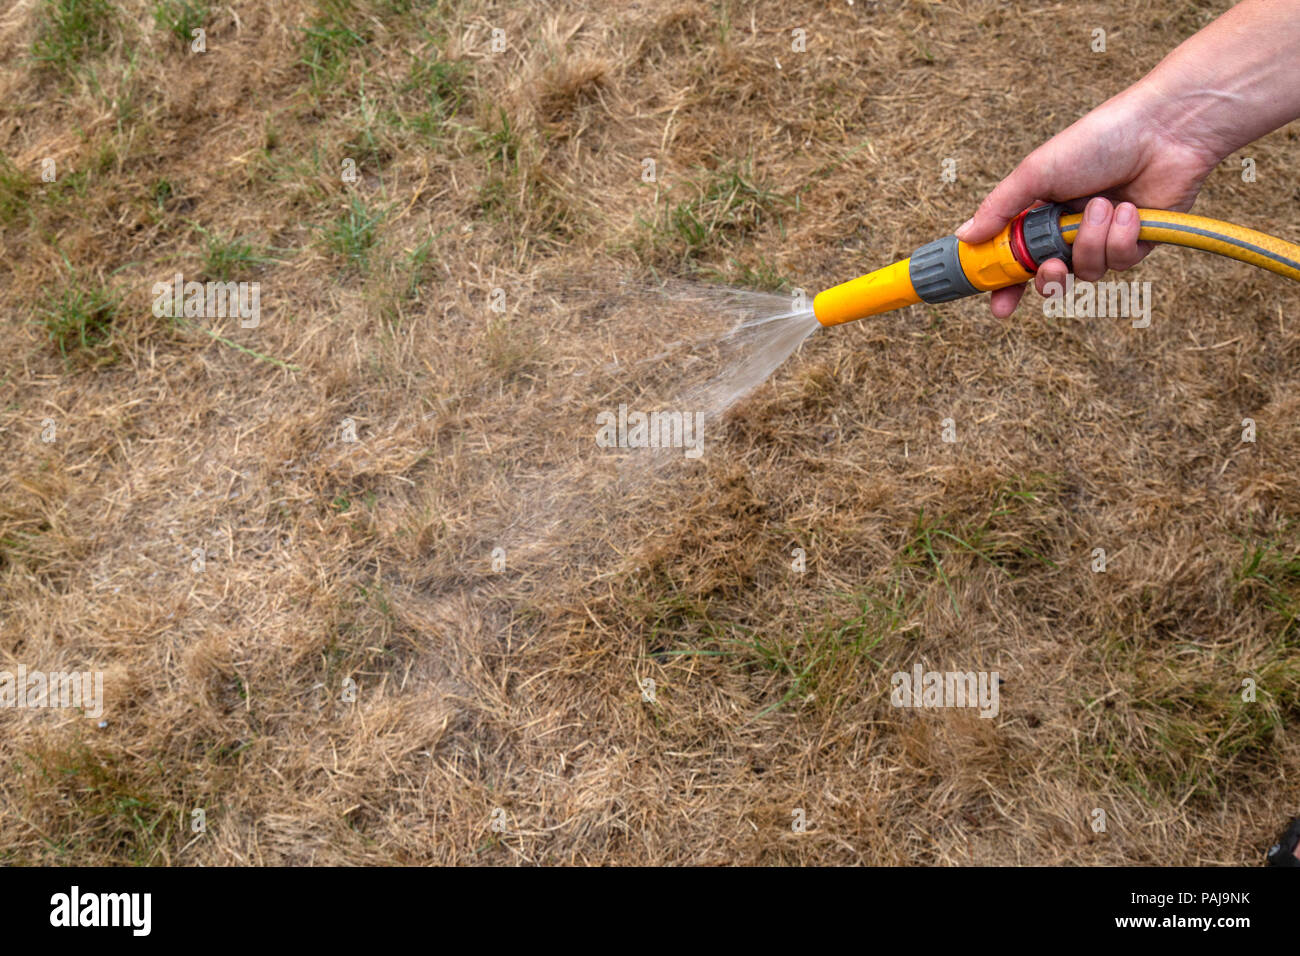 A garden hose pipe watering a dry, brown, area of grass lawn. Single hand in view. Stock Photo